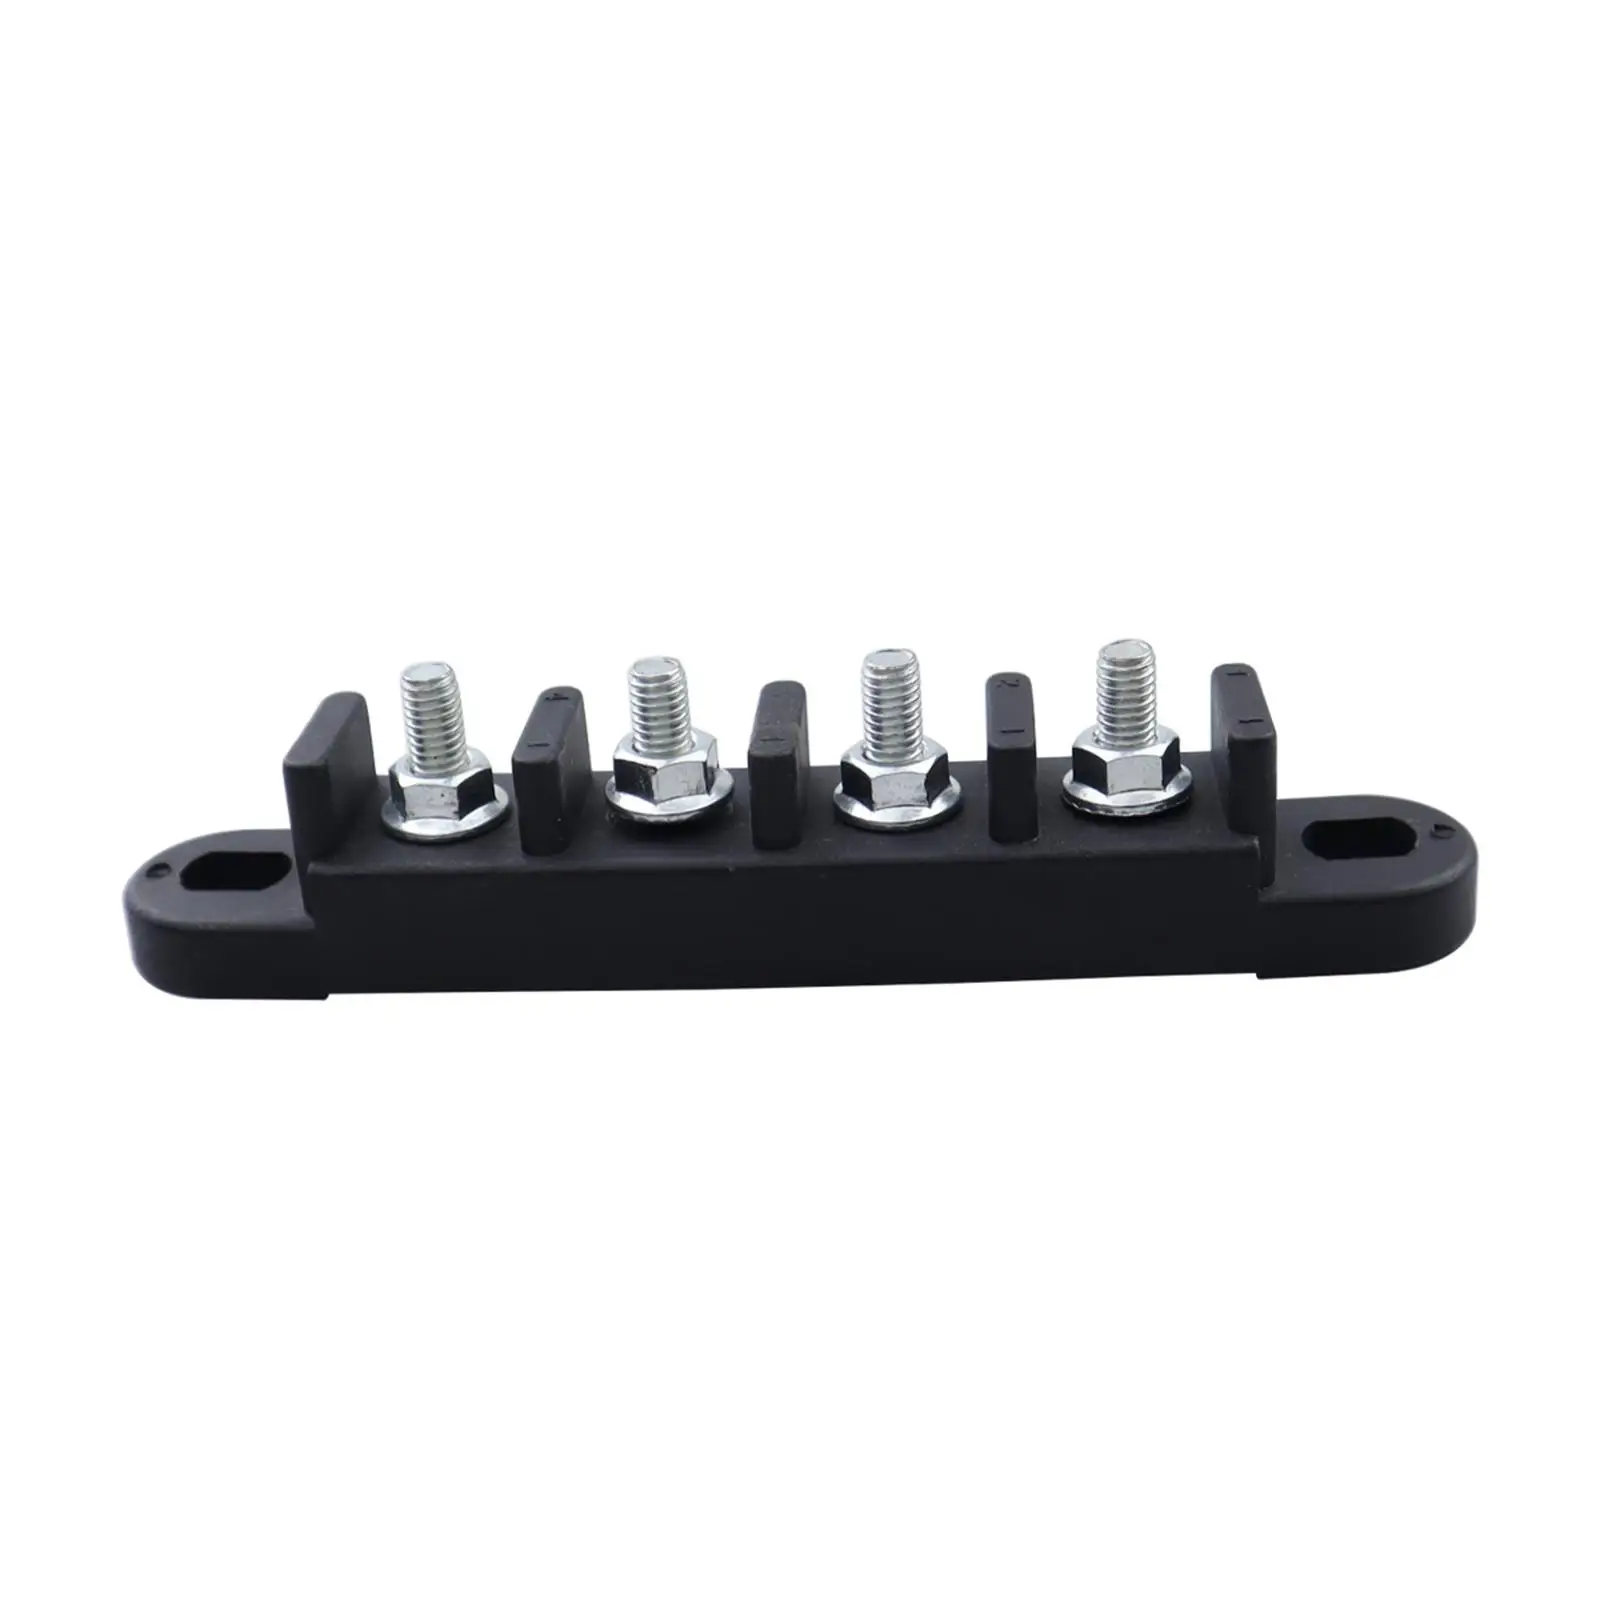 Keyed Busbar Accessory Out 35A Professional Plug and Play Durable Replace High Quality for Honda Talon Accessories